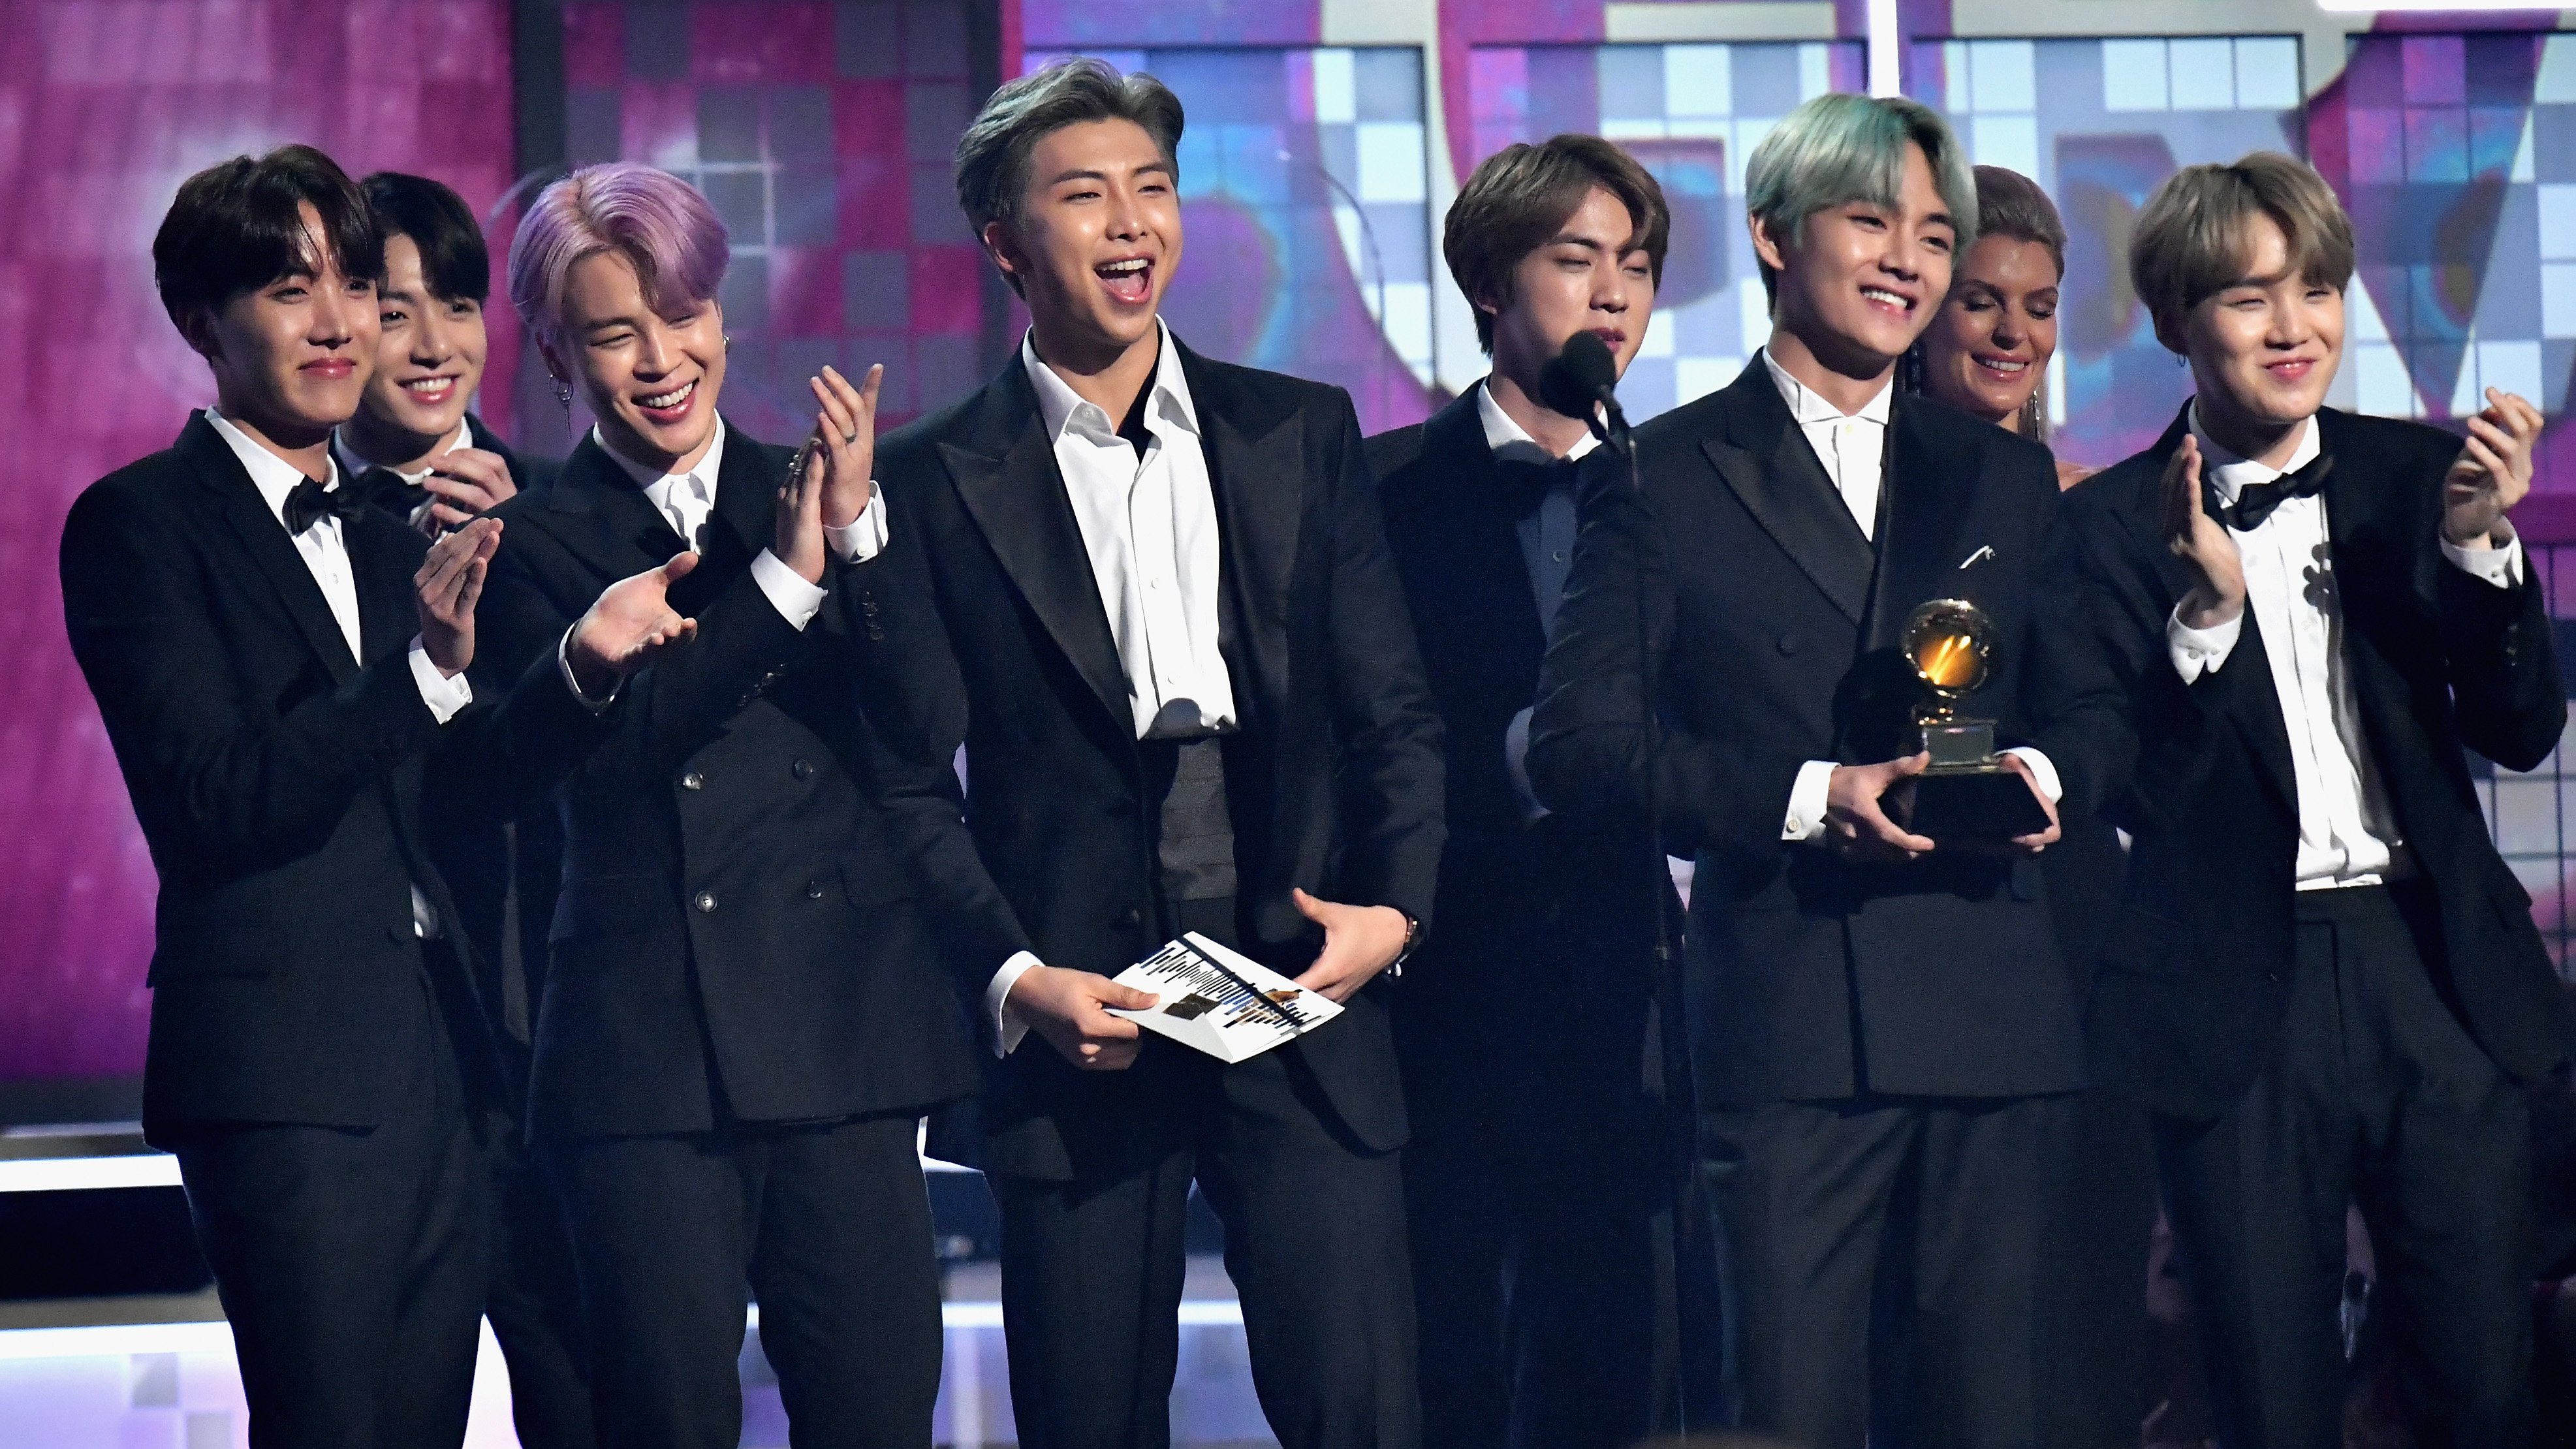 BTS speaks on stage during the 61st Annual GRAMMY Awards